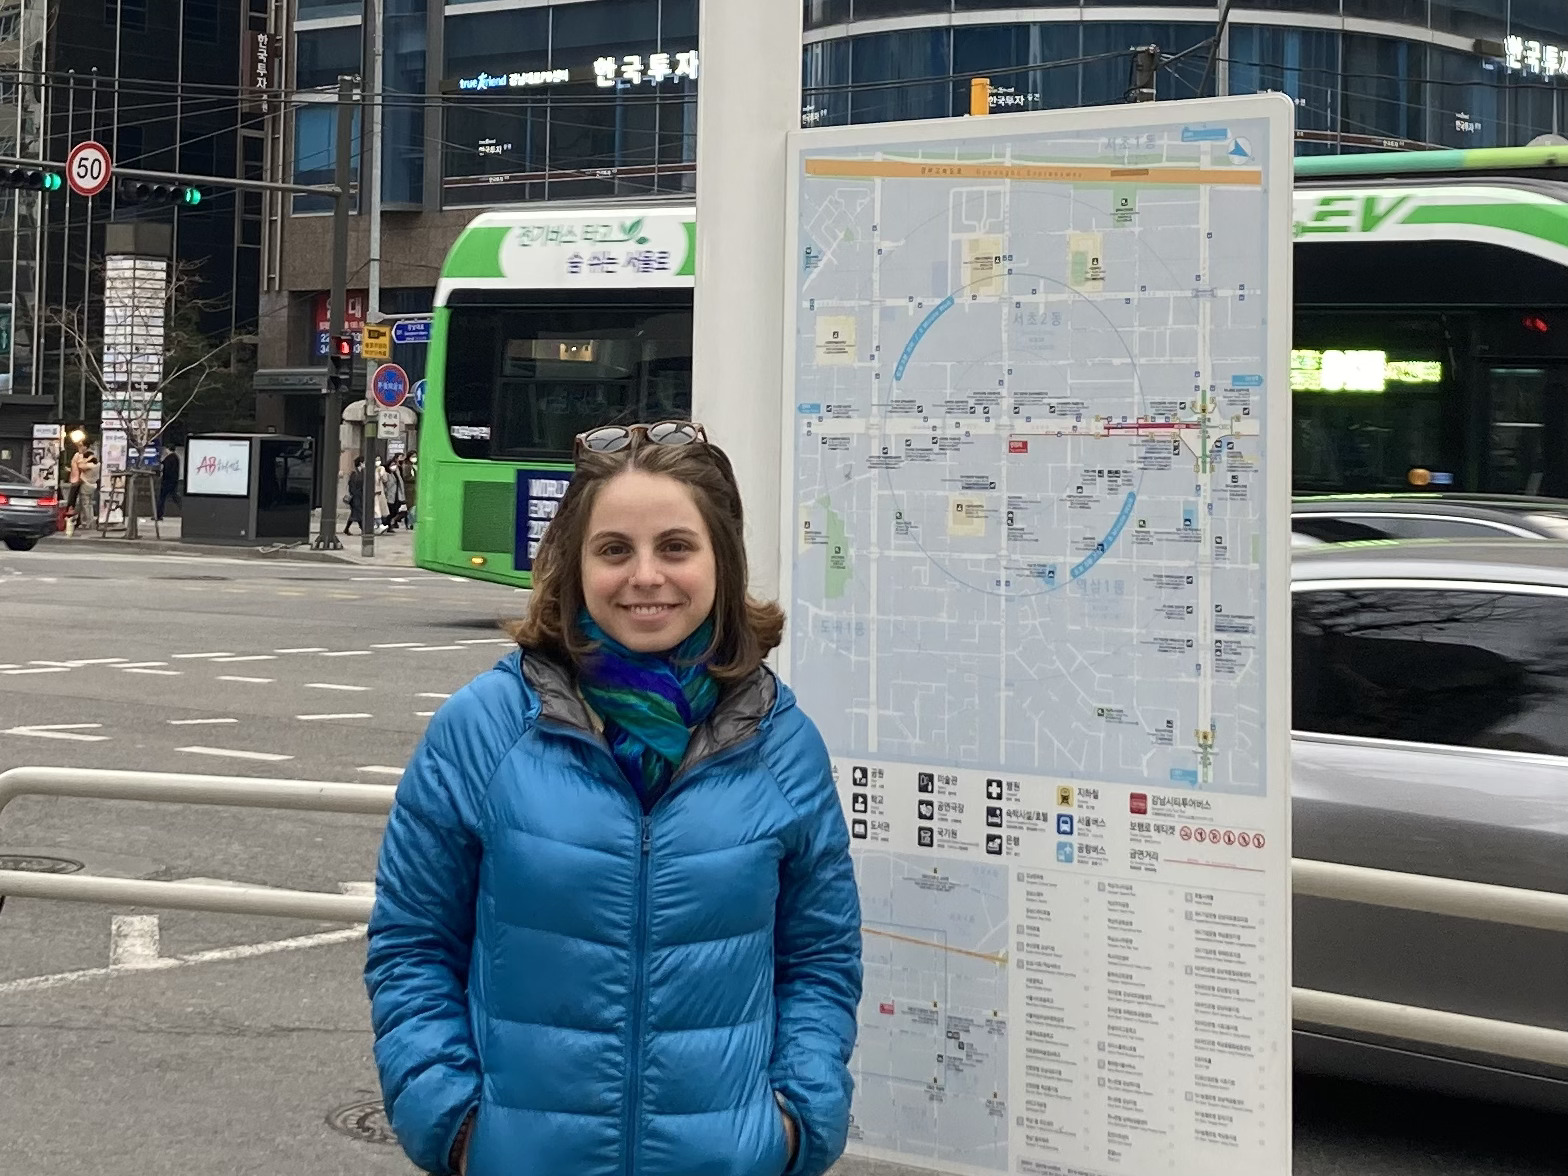 Sophie Arnstein wearing glasses on her head, a blue coat, and a blue-green scarf standing on the street in front of a map and smiling.